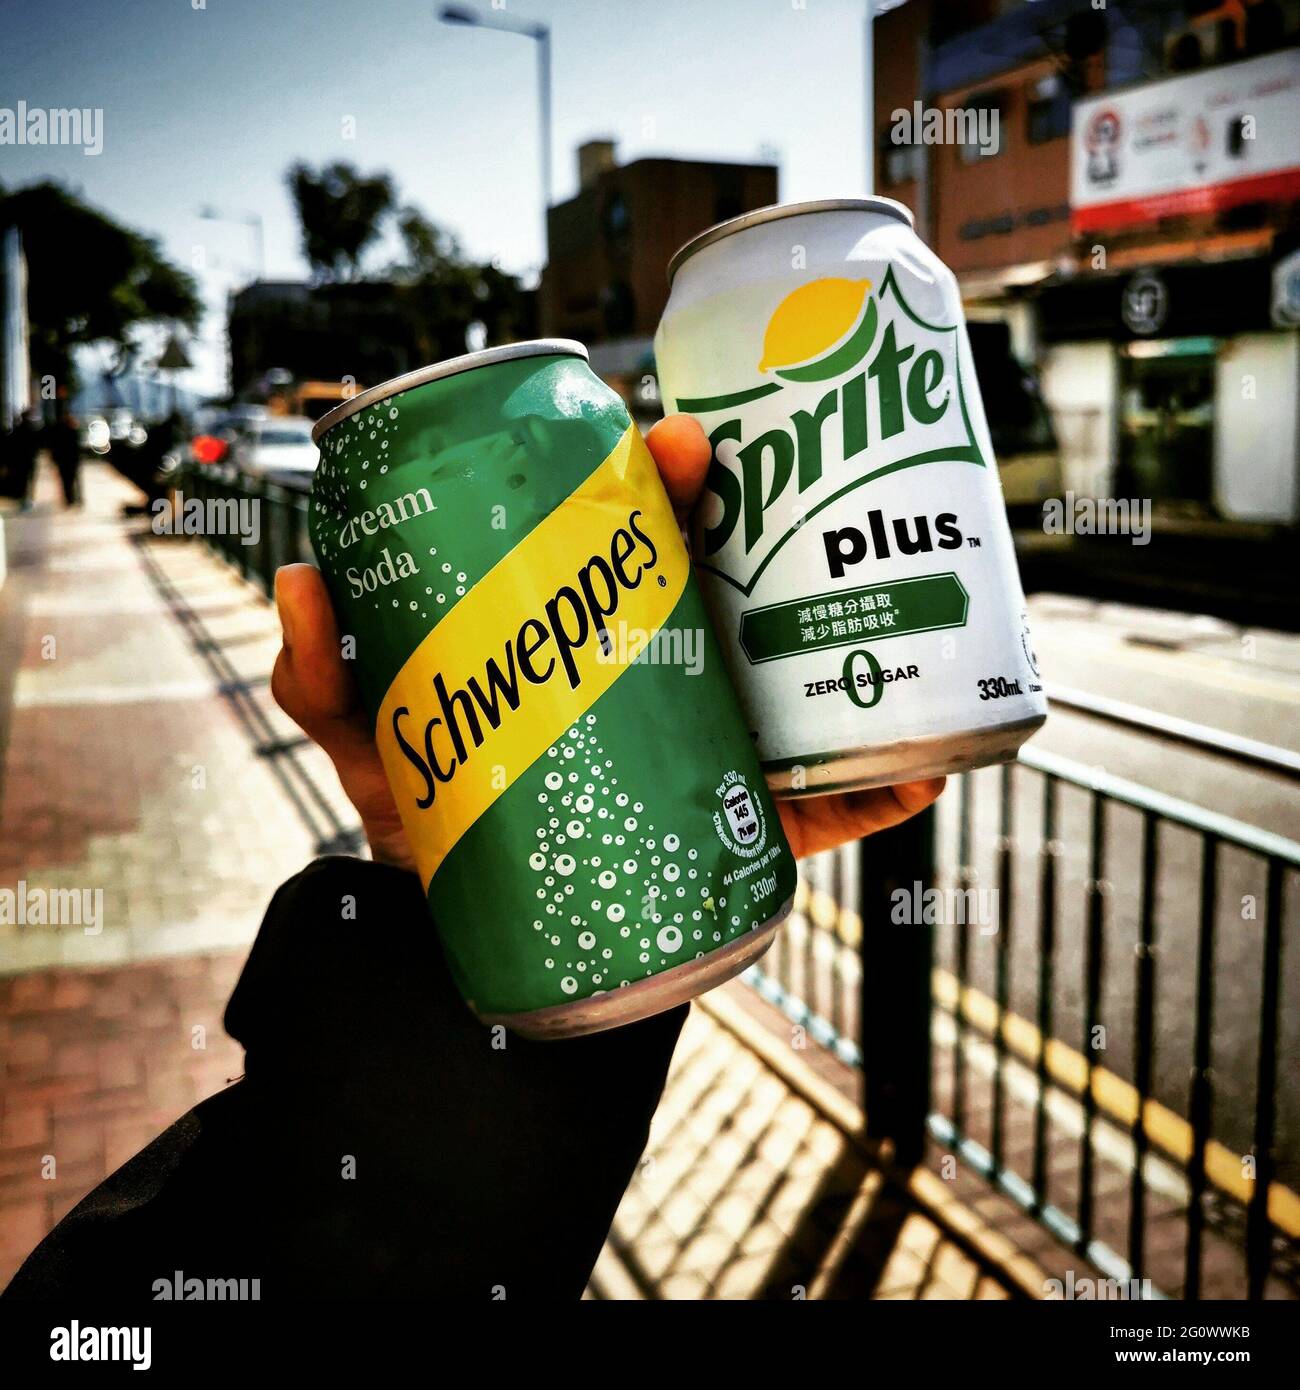 SAI KUNG, HONG KONG - Dec 10, 2019: A shot if a Schweppes cream soda can  and a Sprite Plus soda can being held up along the streets of Sai Kung, Hong